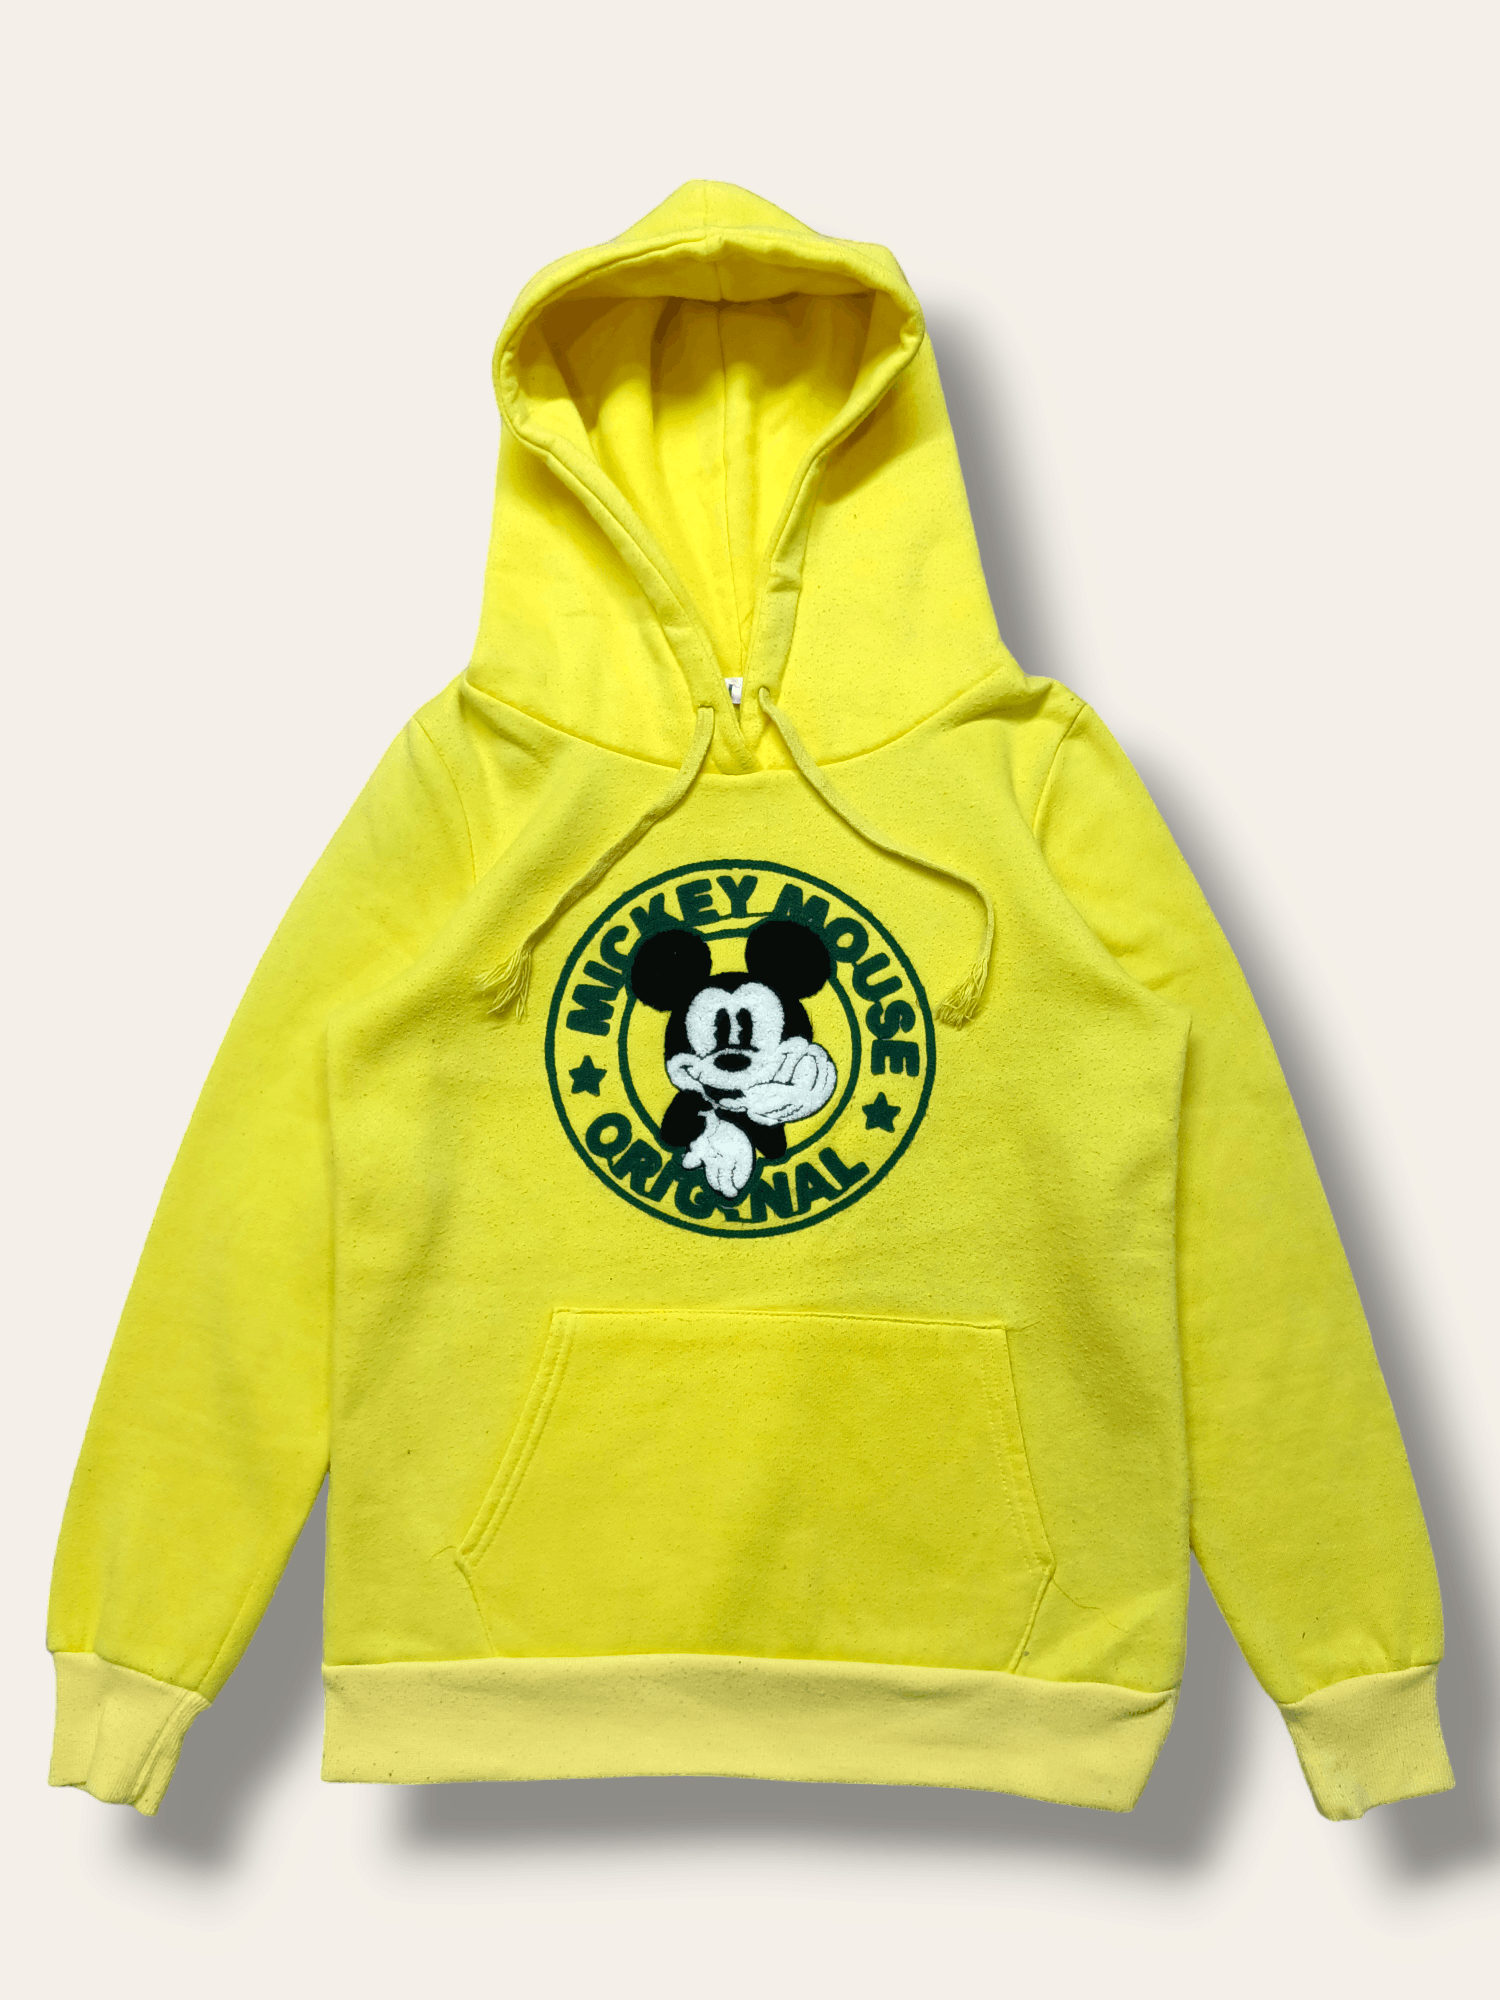 Archival Clothing - Mickey Mouse Original Embroidery Graphic Hoodie - 1